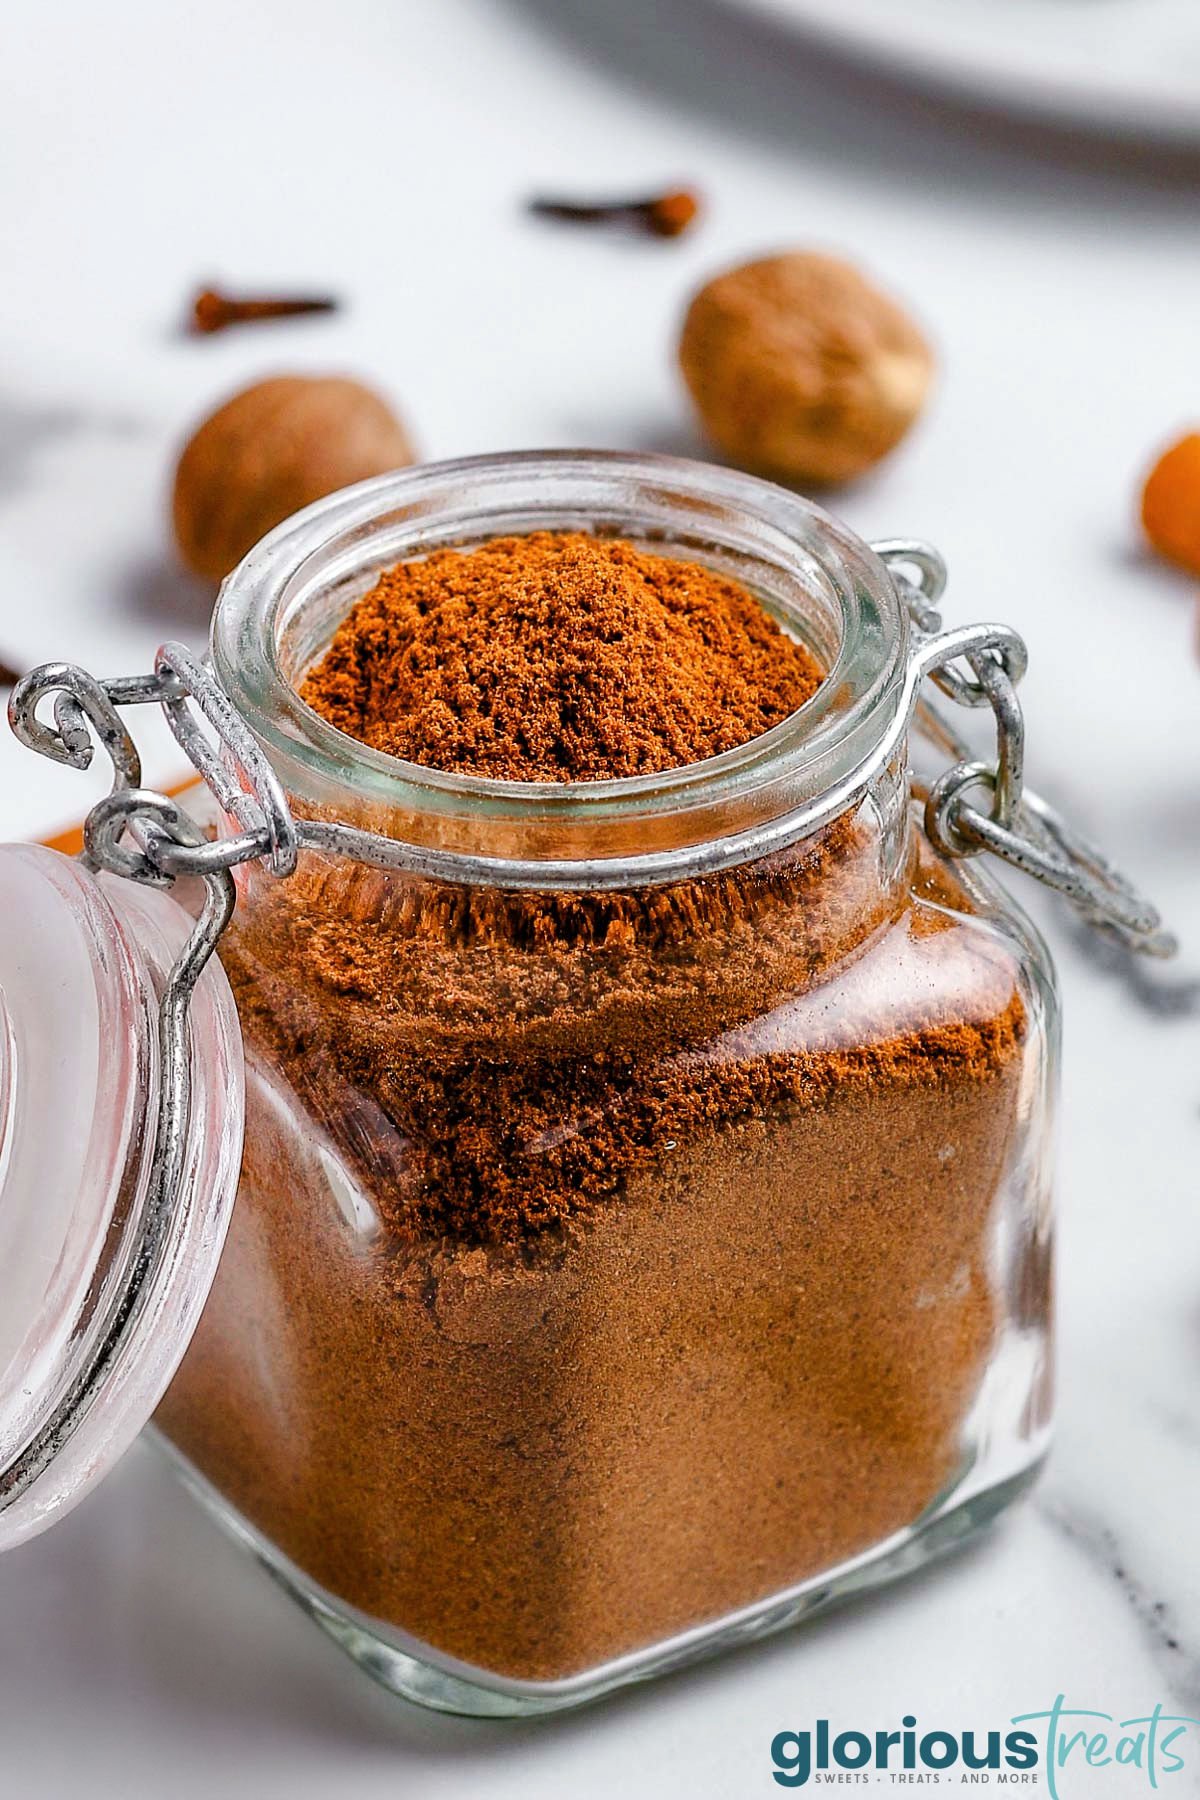 homemade pumpkin pie spice in small glass jar with hinged jar. whole nutmeg and cloves can be seen in the background.